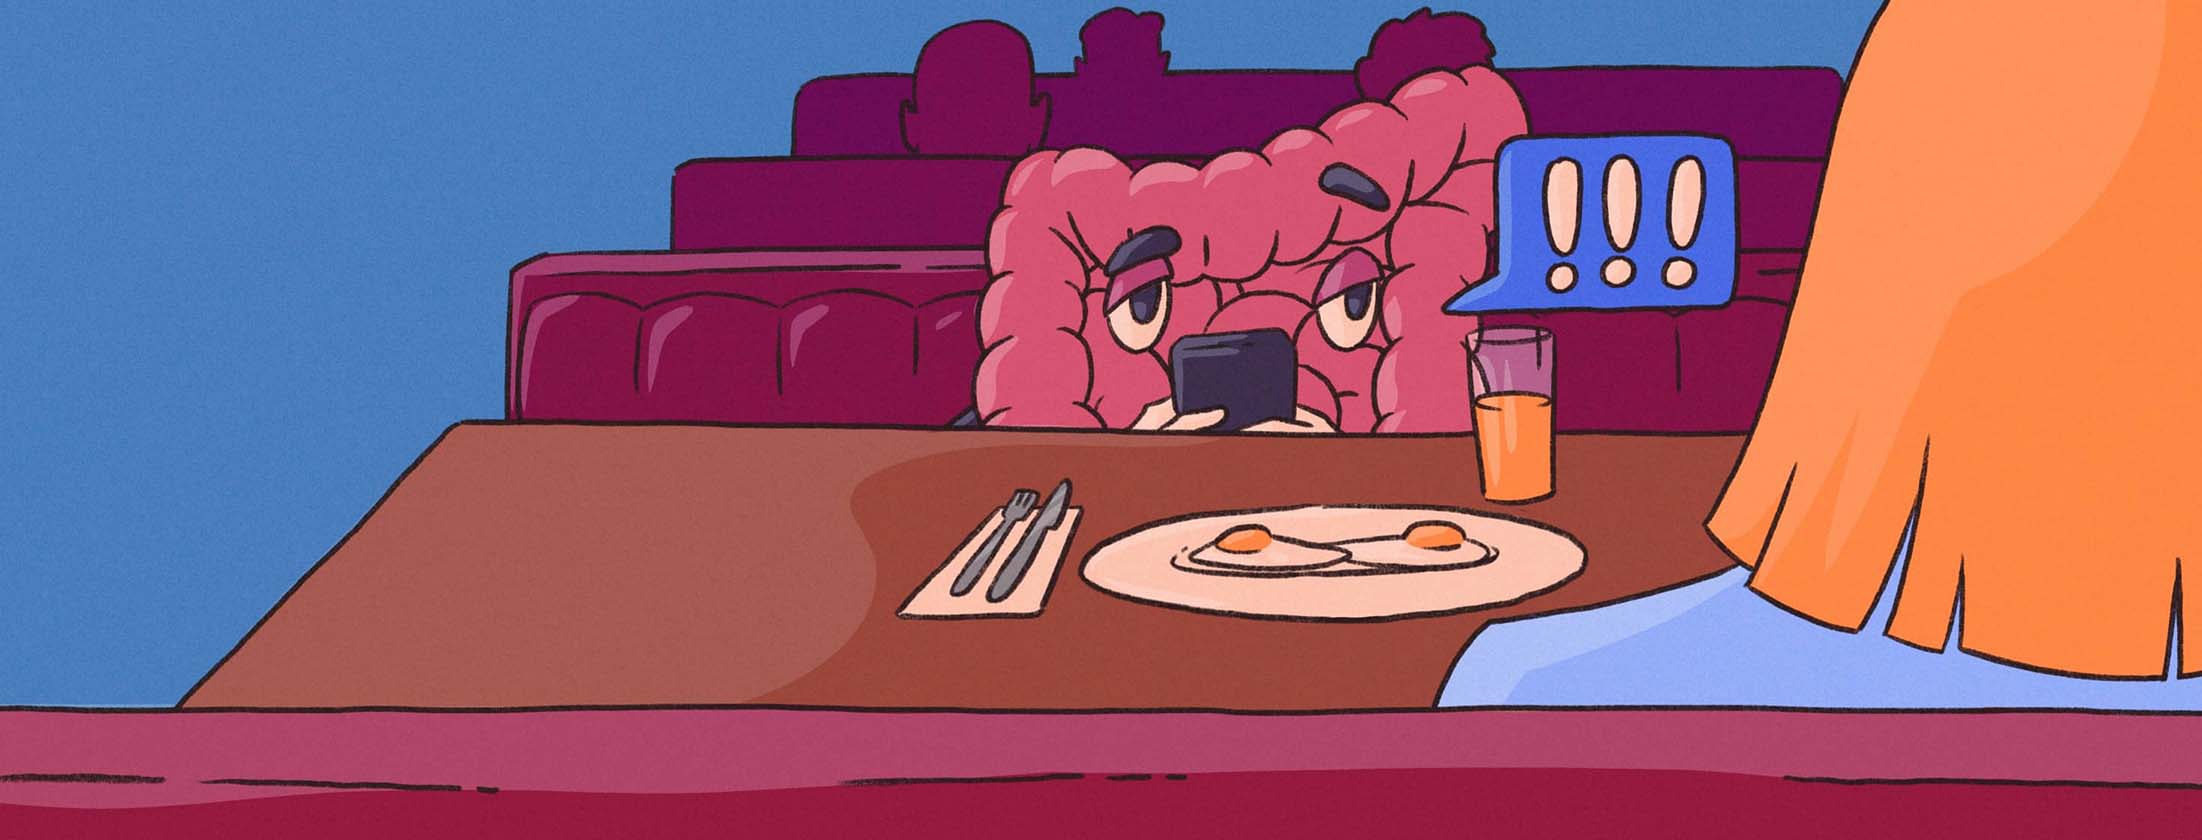 Adult woman sitting at a restaurant booth with a plate of eggs while a personified GI tract sits across from her sending warning messages via text